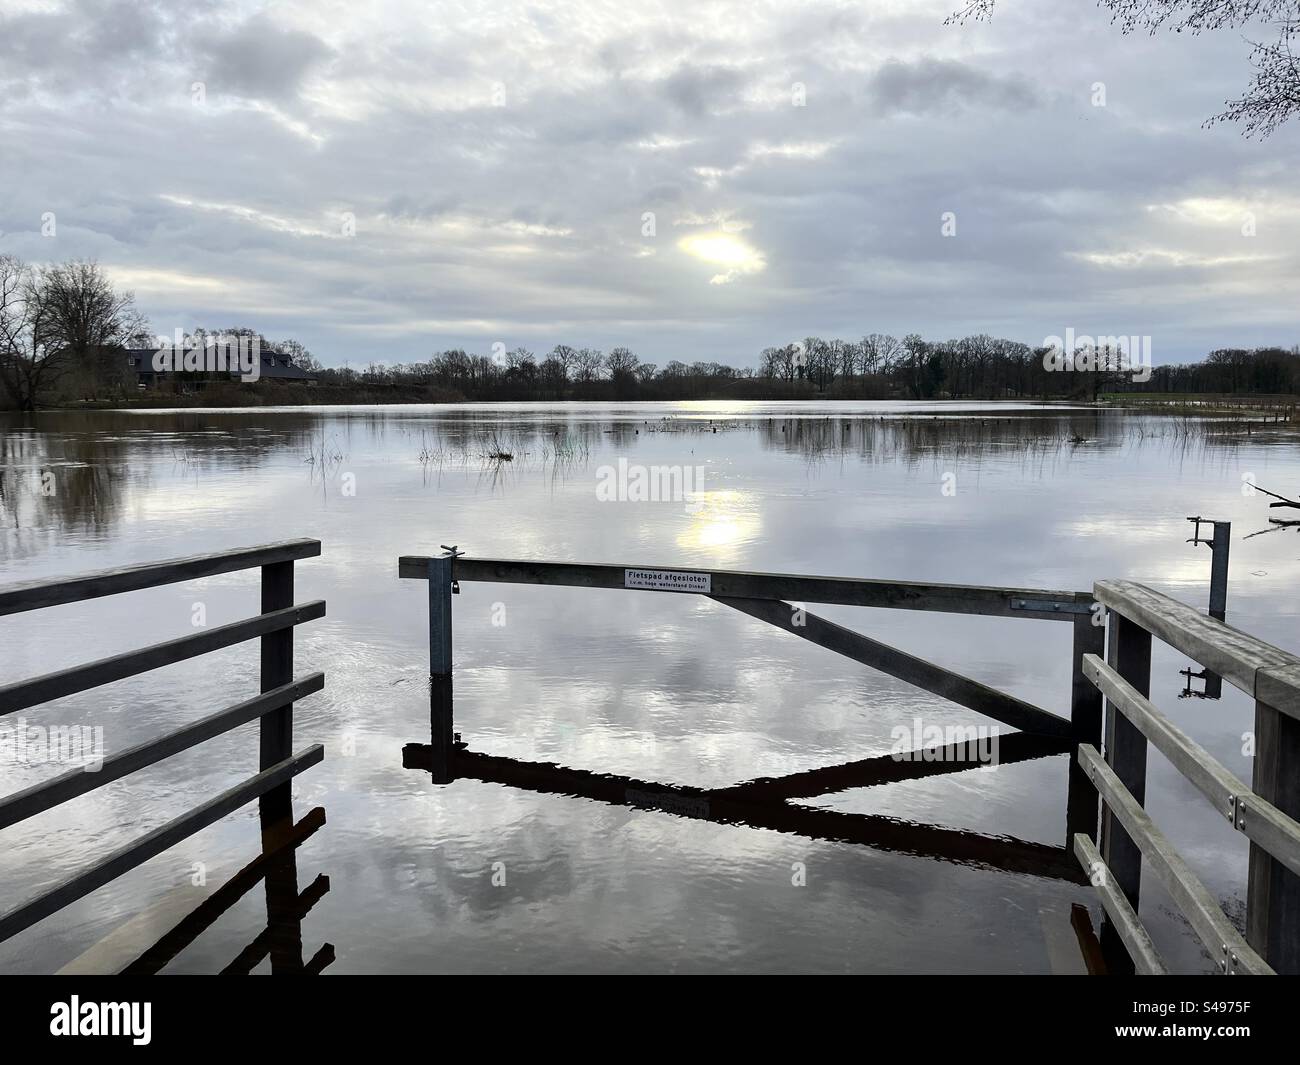 Losser, Netherlands. The river 'Dinkel' has overflowed its banks near Losser. That creates a beautiful spectacle. Stock Photo